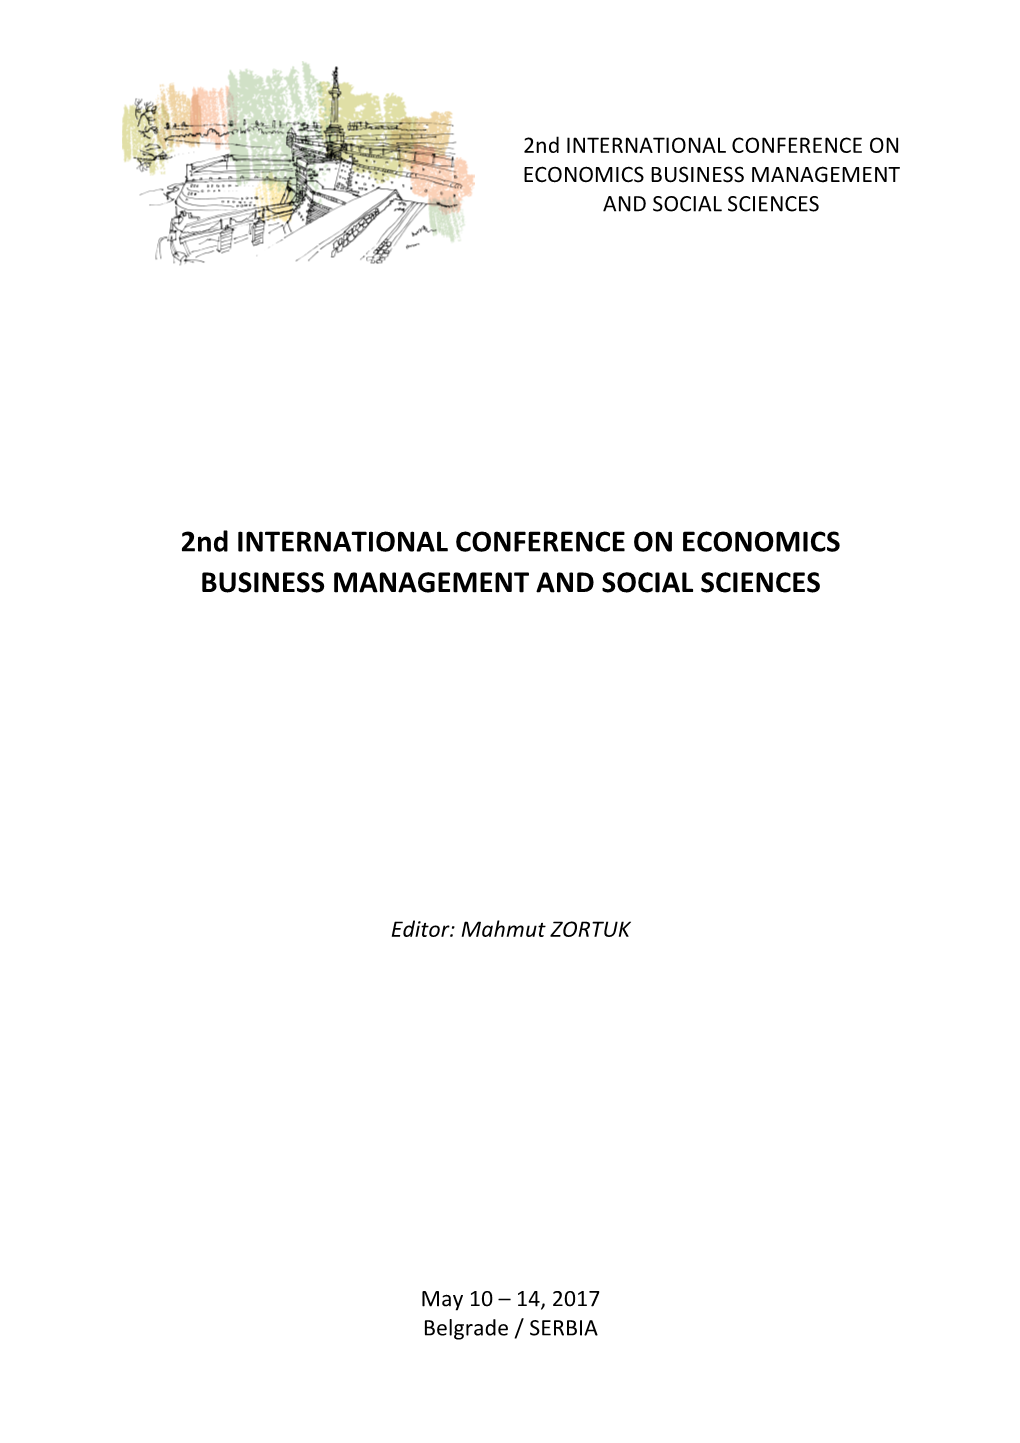 2Nd INTERNATIONAL CONFERENCE on ECONOMICS BUSINESS MANAGEMENT and SOCIAL SCIENCES